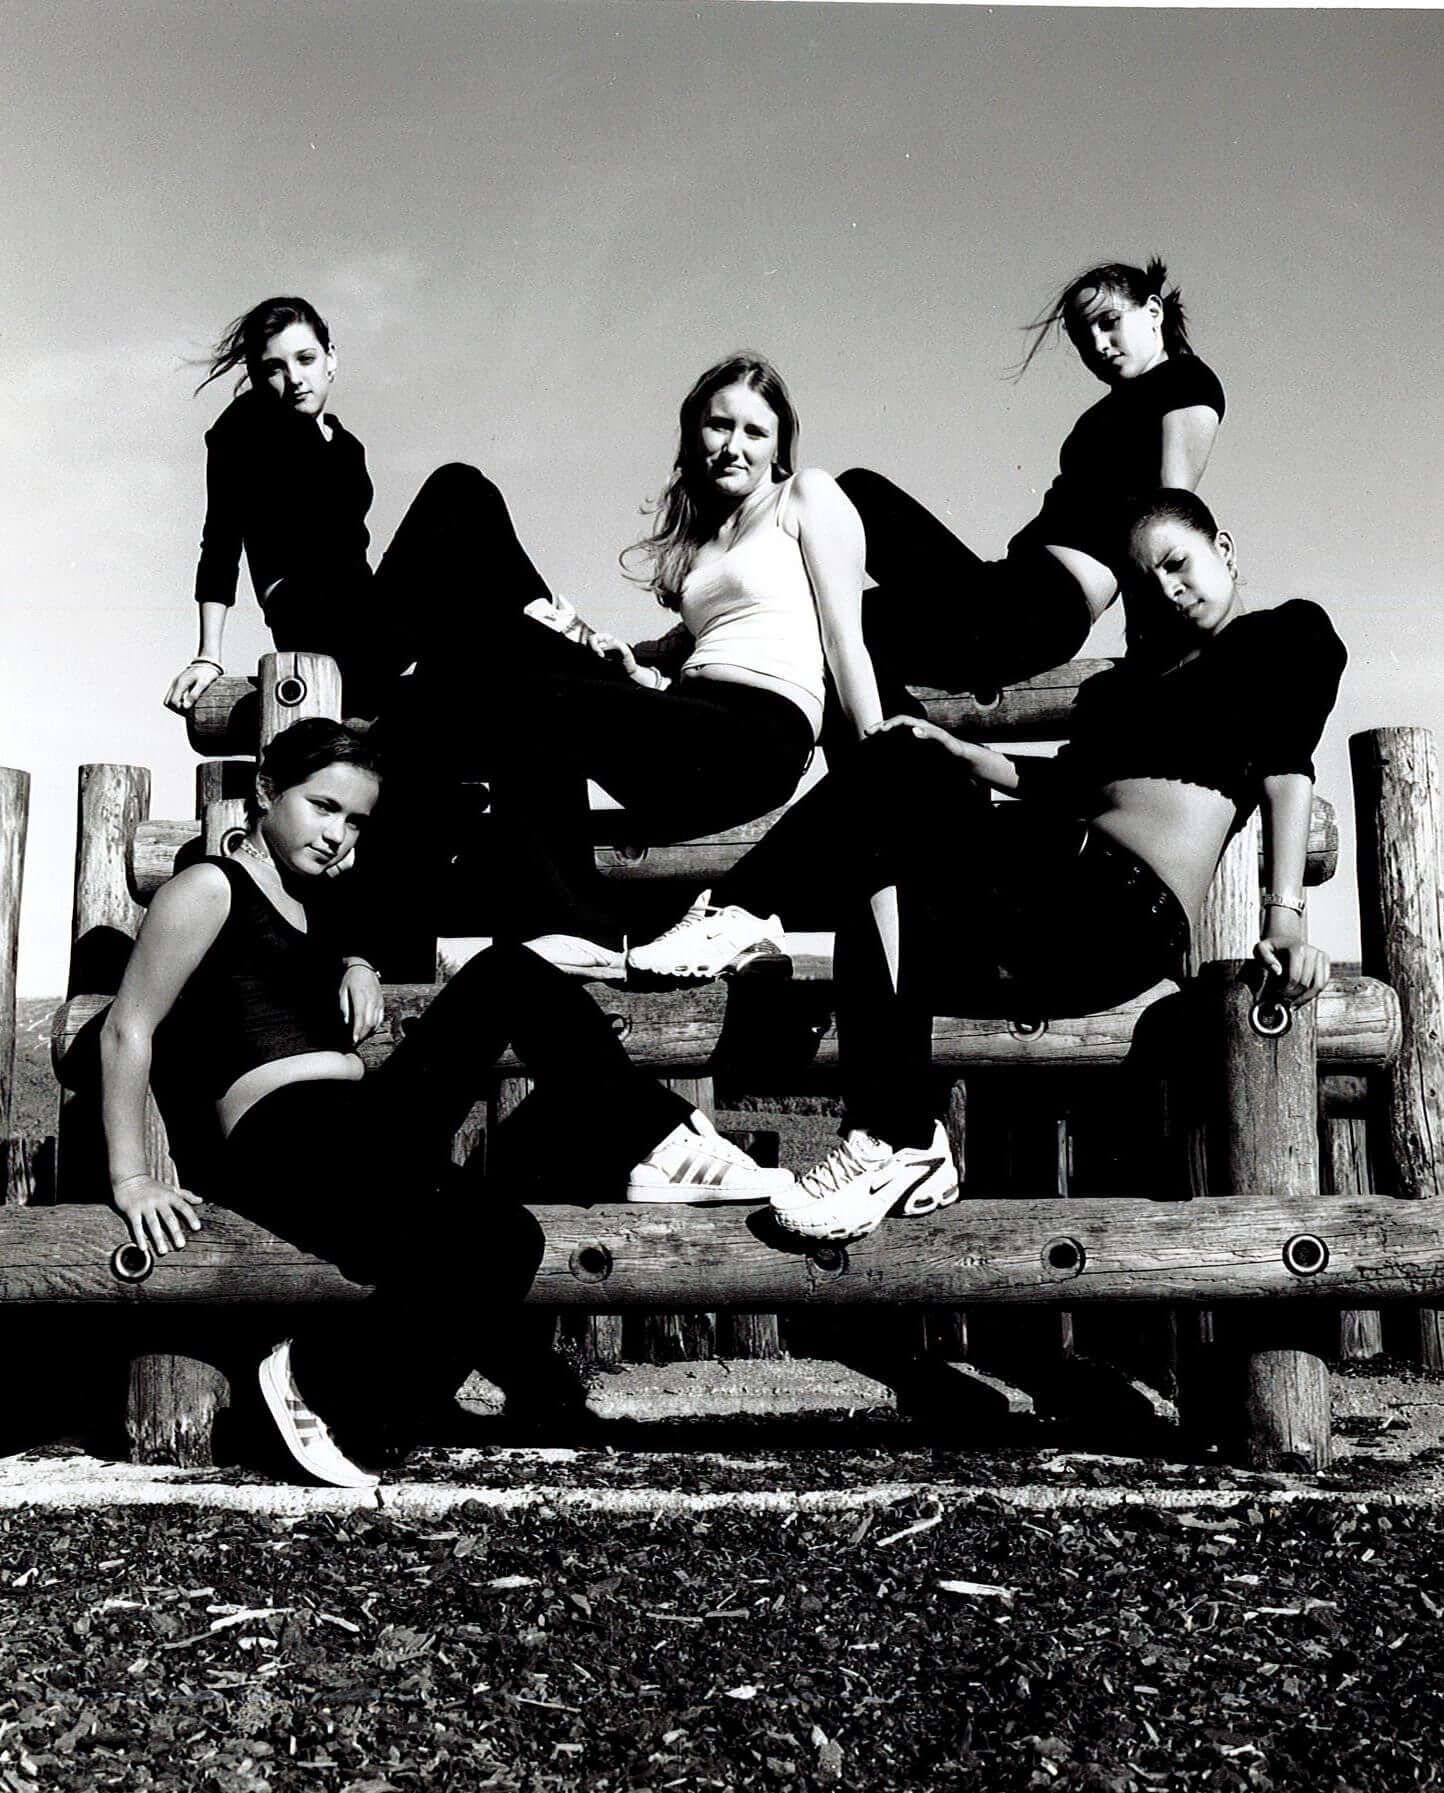 Comart, Youth Dance Group, Brighton 2004, Choregrapher and Director